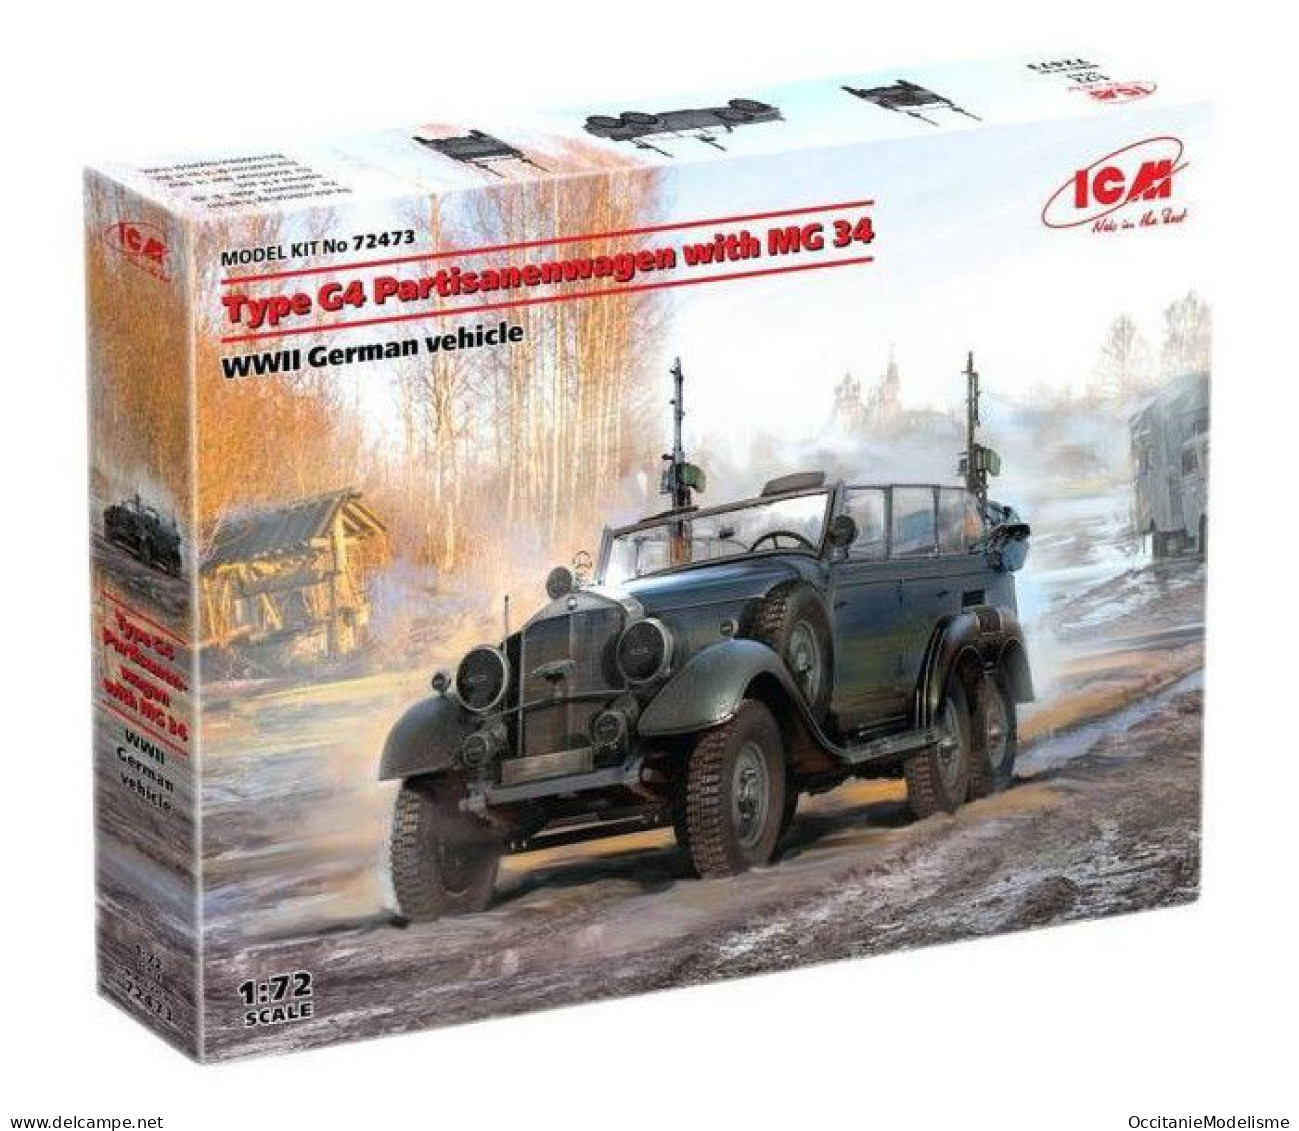 ICM - MERCEDES-BENZ TYPE G4 Partisanenwagen MG34 WWII Maquette Kit Plastique Réf. 72473 Neuf NBO 1/72 - Véhicules Militaires